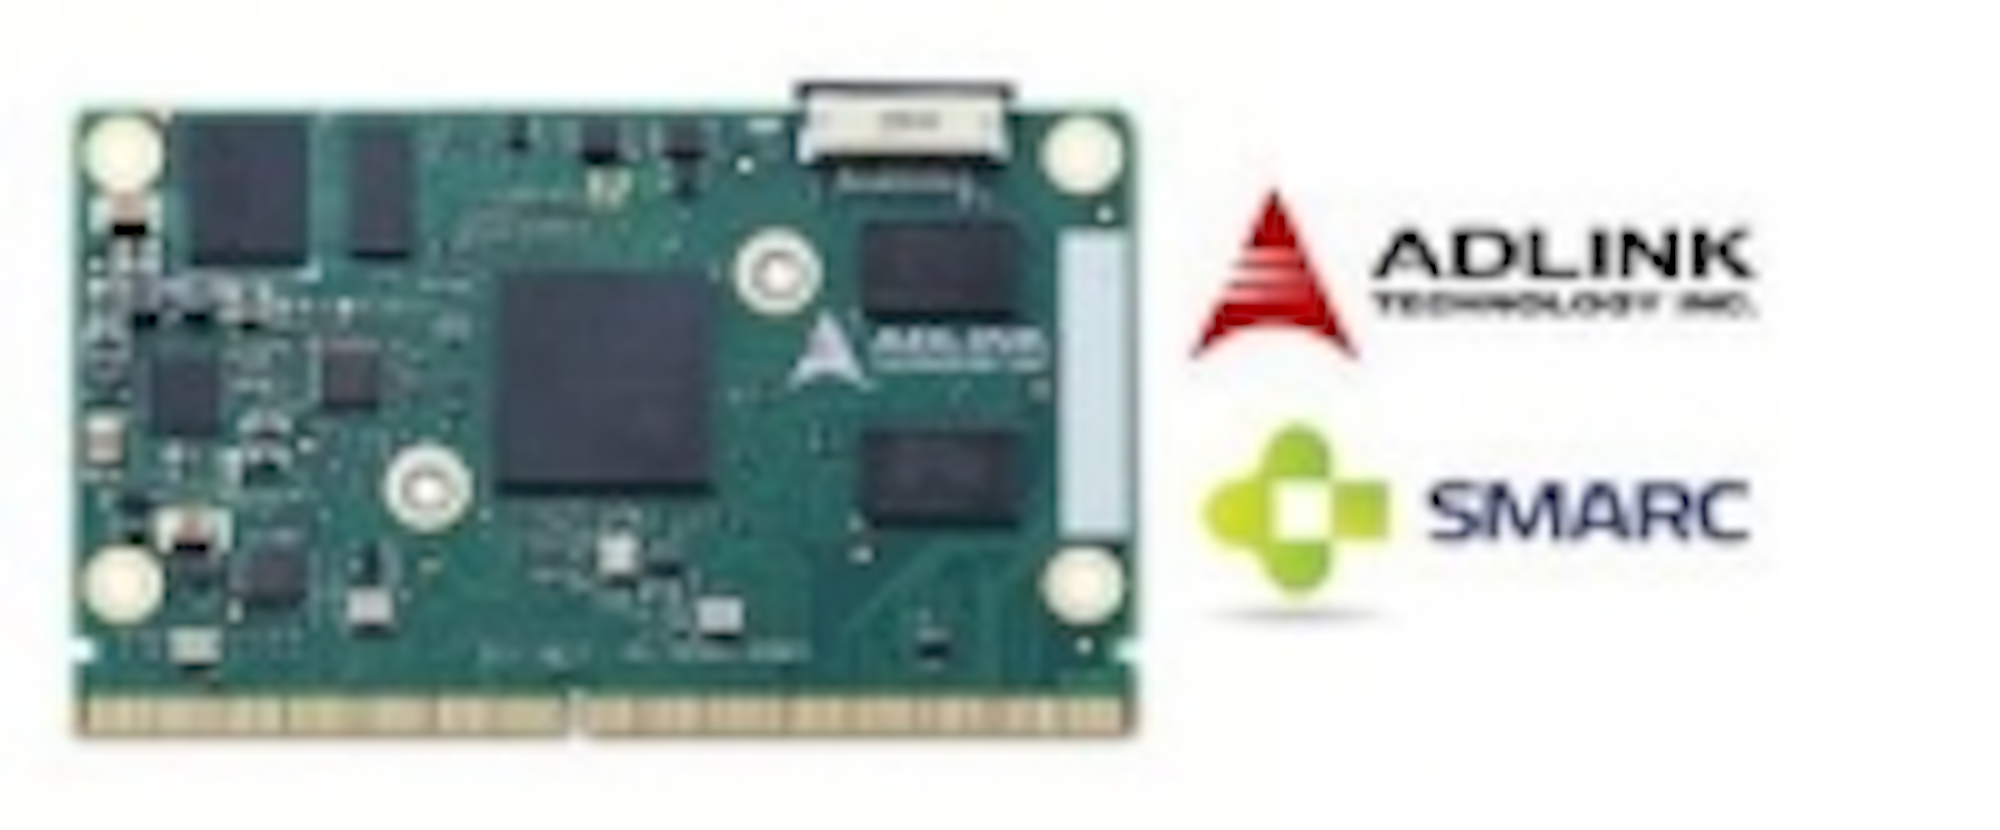 Adlink Introduces Smarc Module For Small Form Factor Embedded And